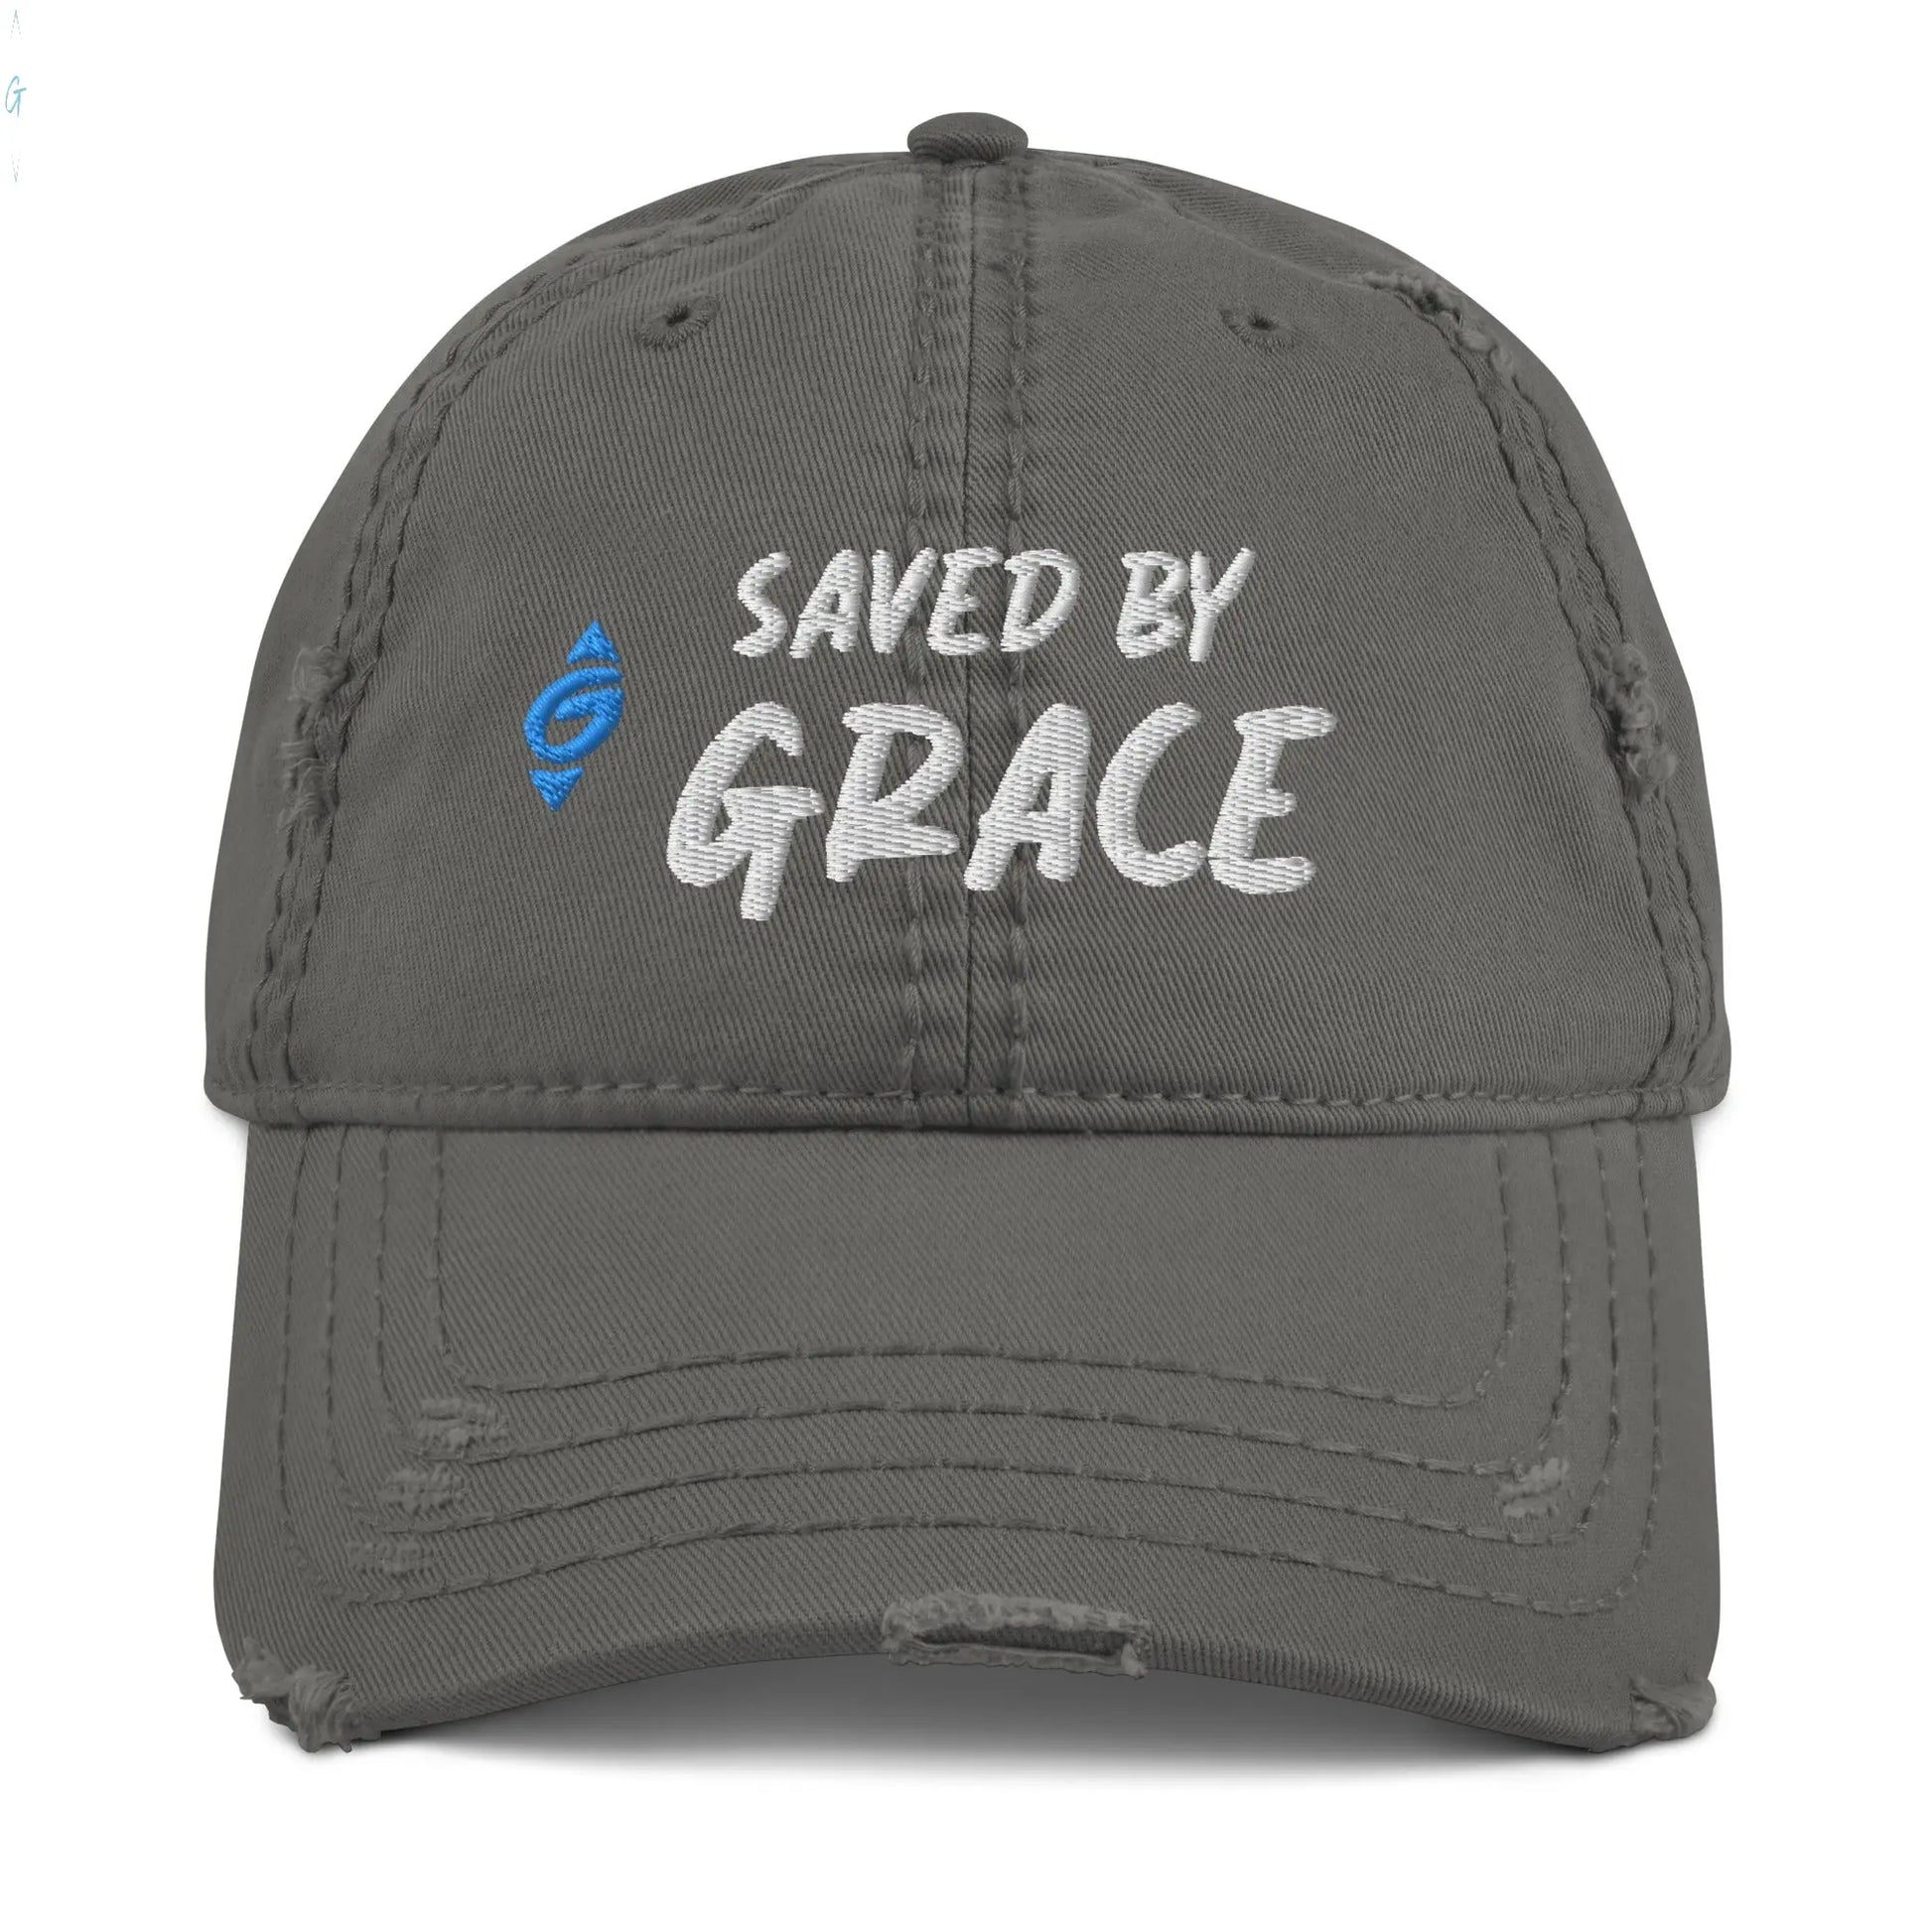 SAVED BY GRACE Distressed Ball Cap God's Corner Store